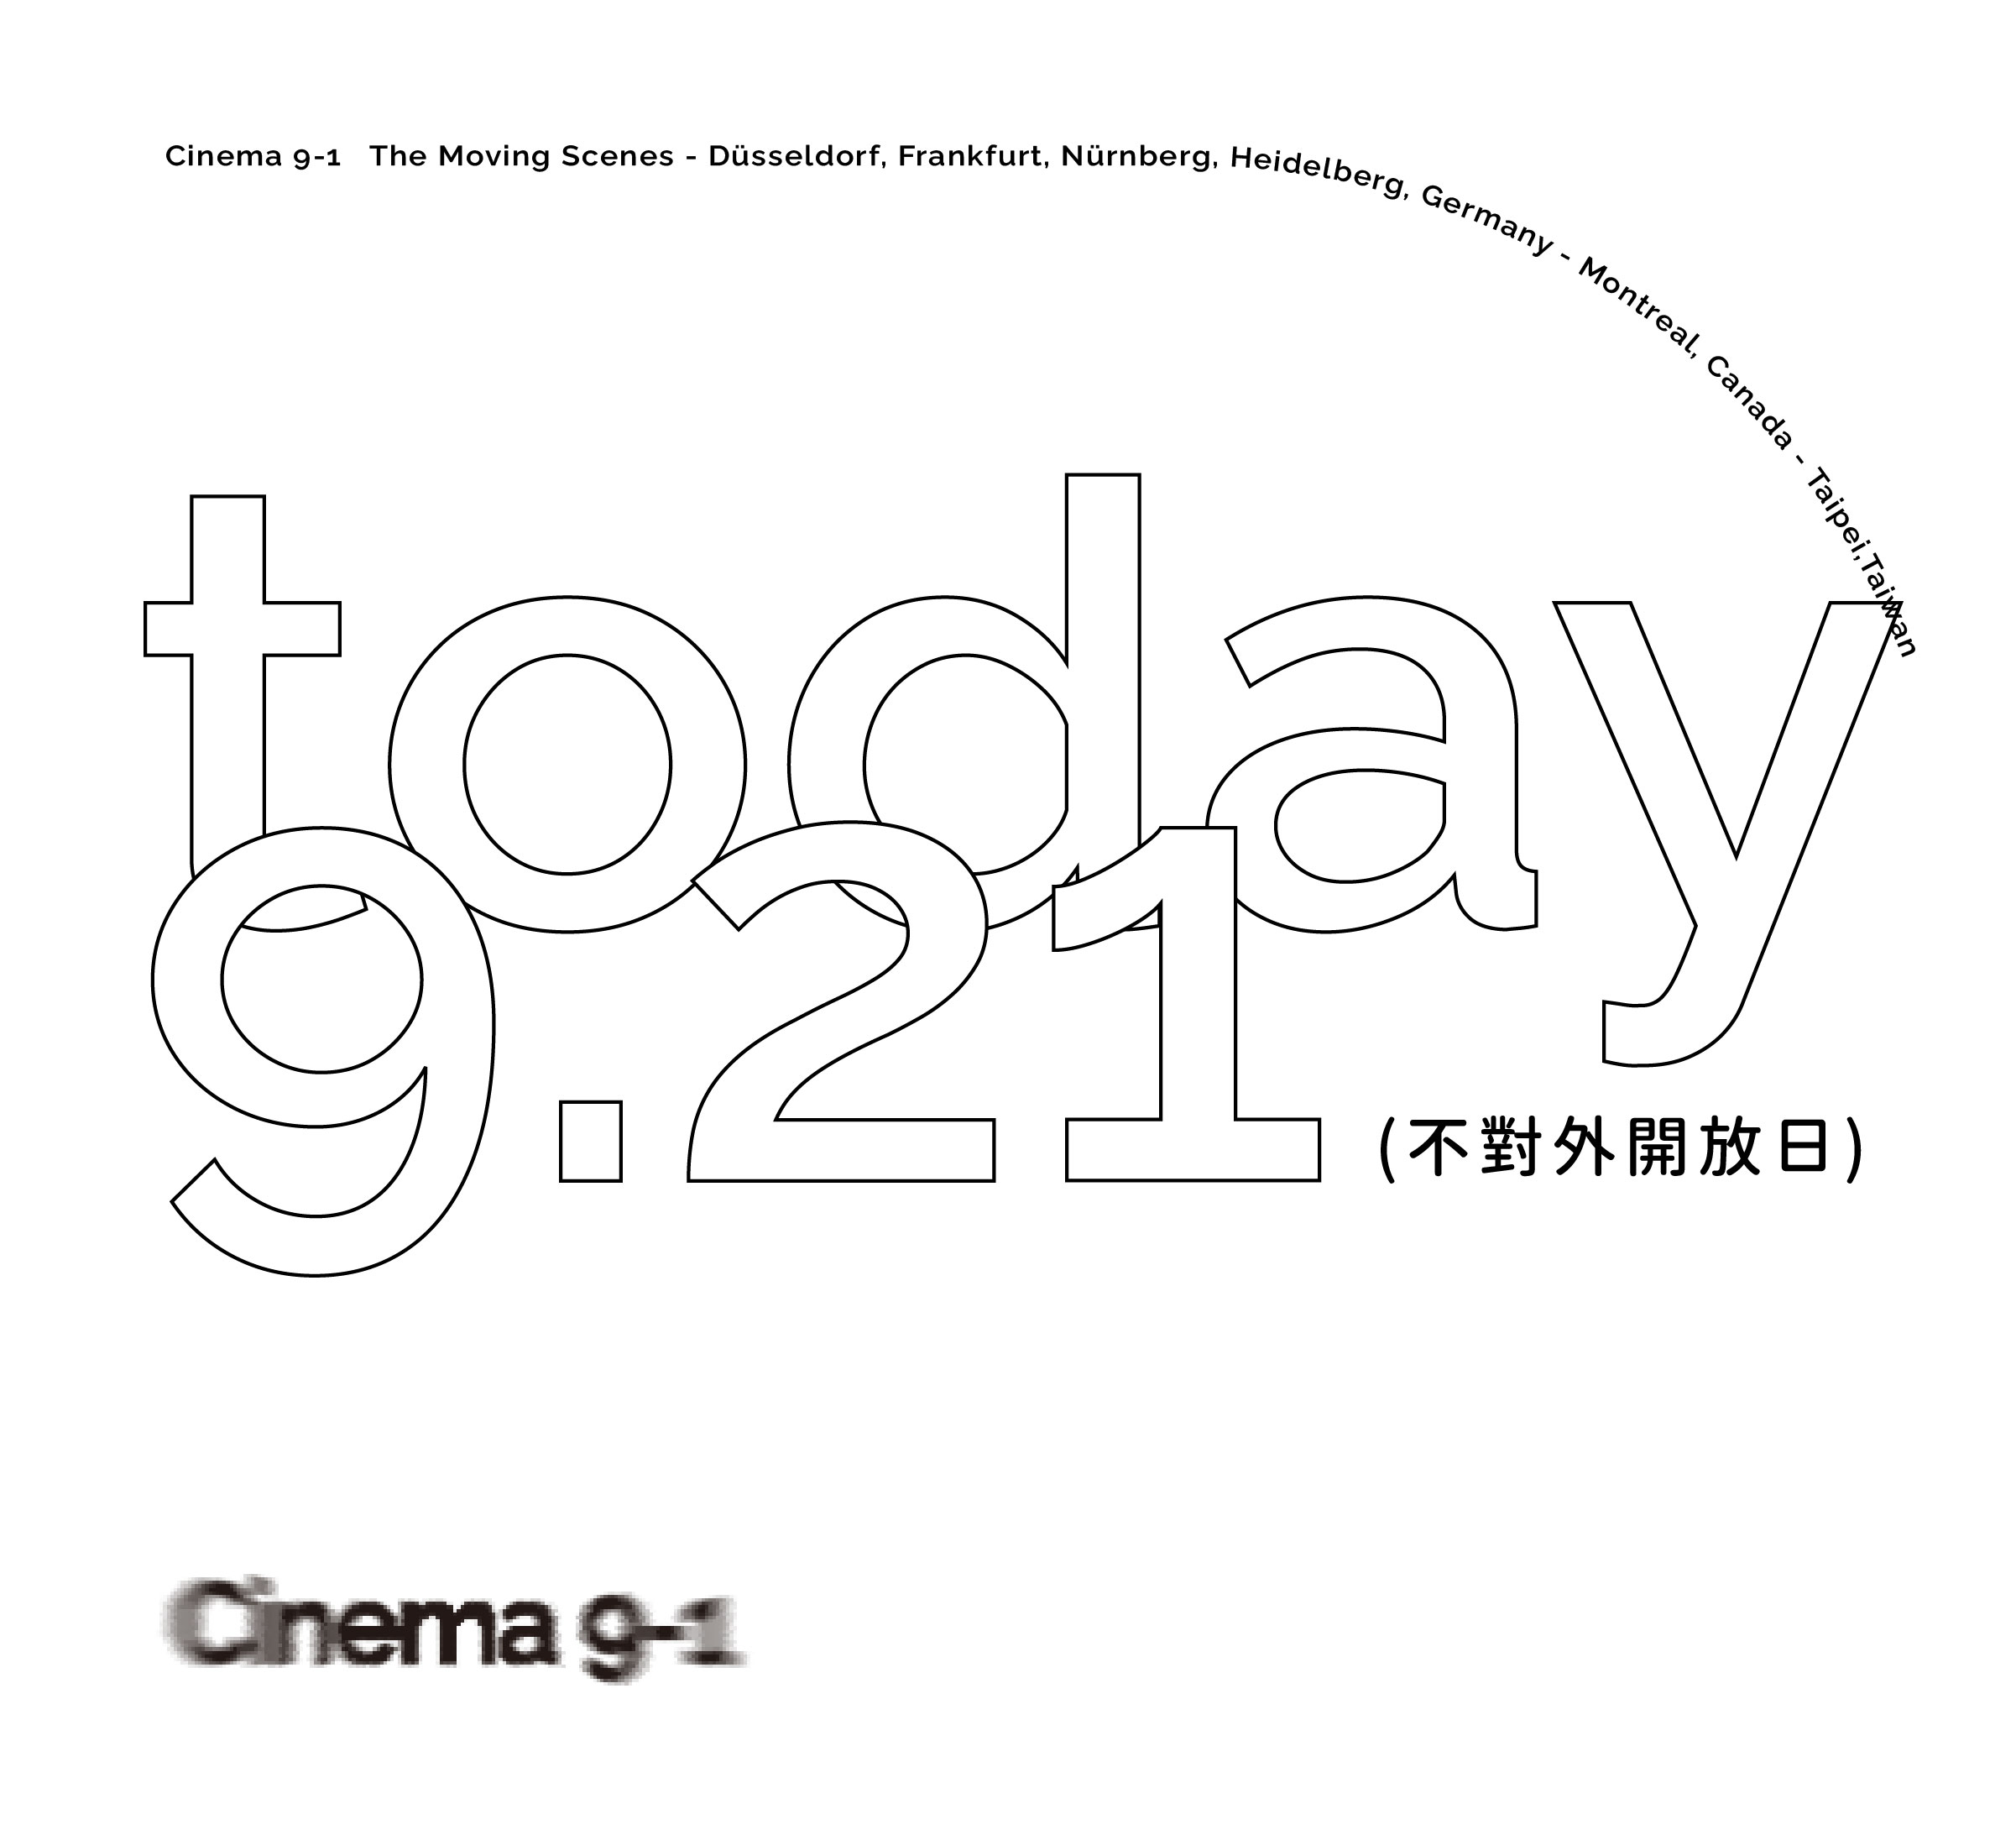 Exhibition 'Cinema 9-1' poster, Countdown D-DAY.